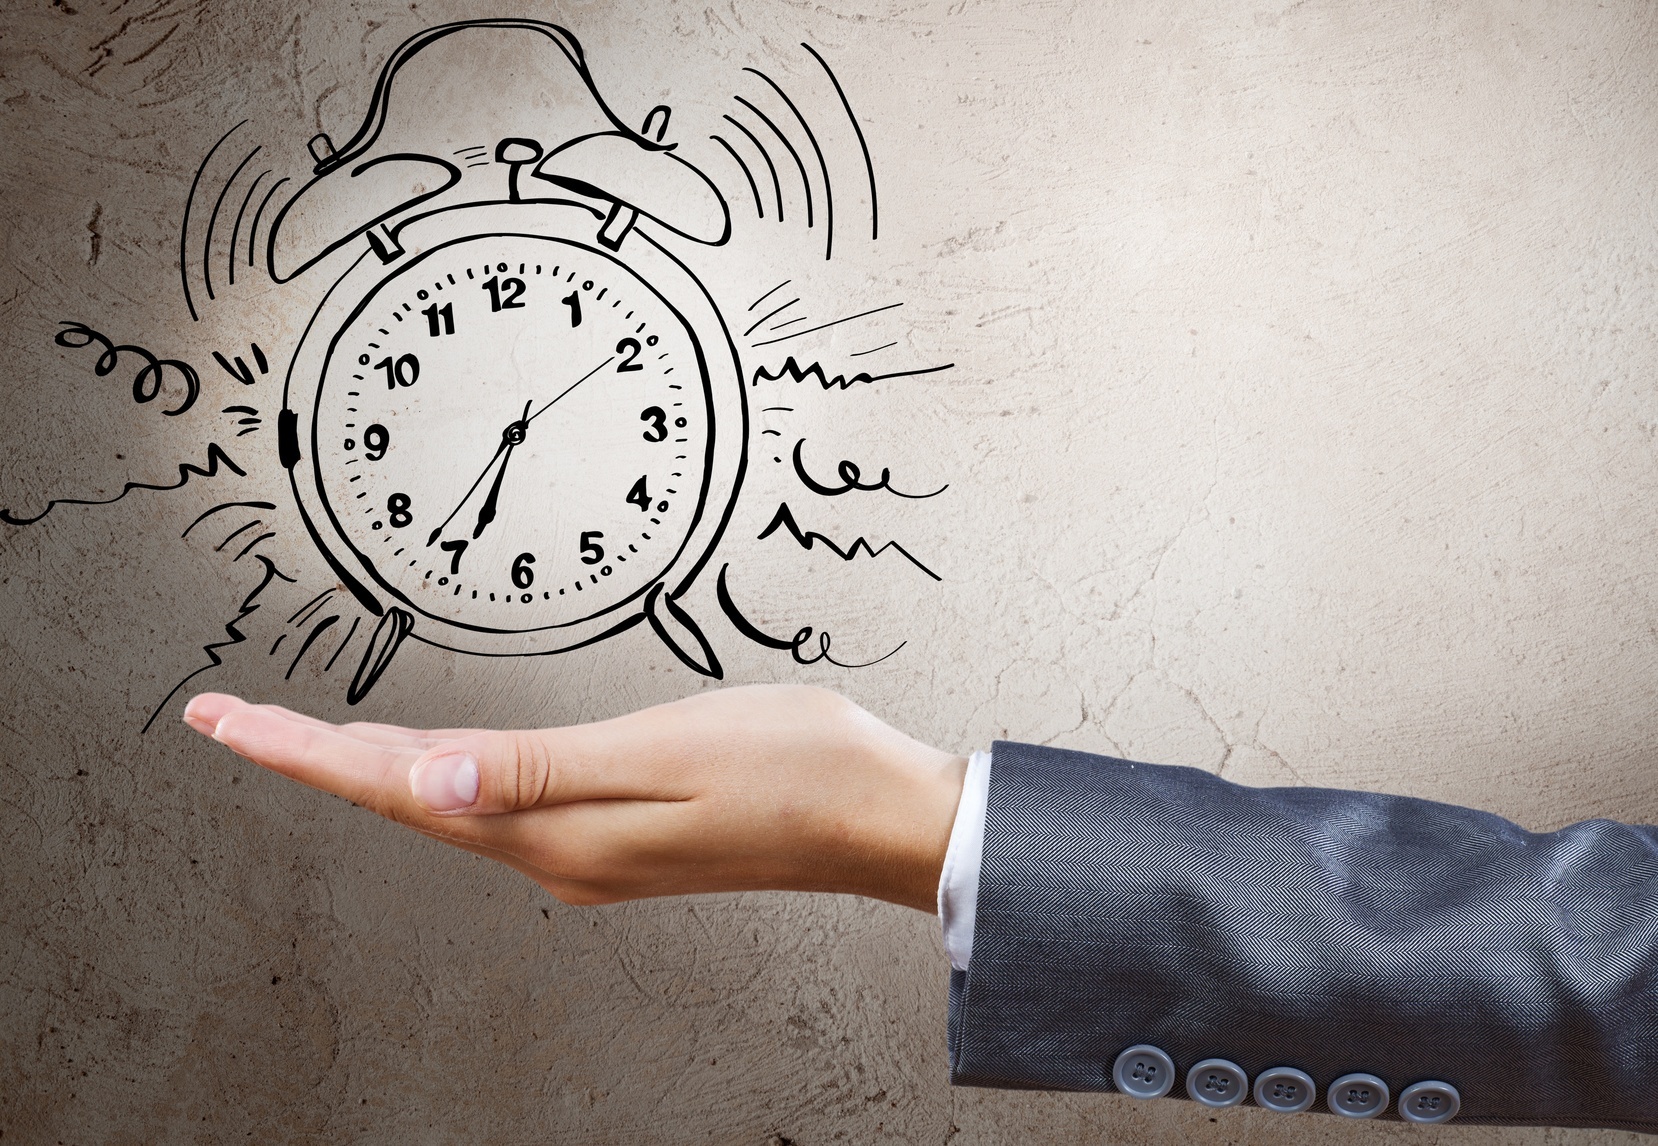 Creating urgency in the sales cycle